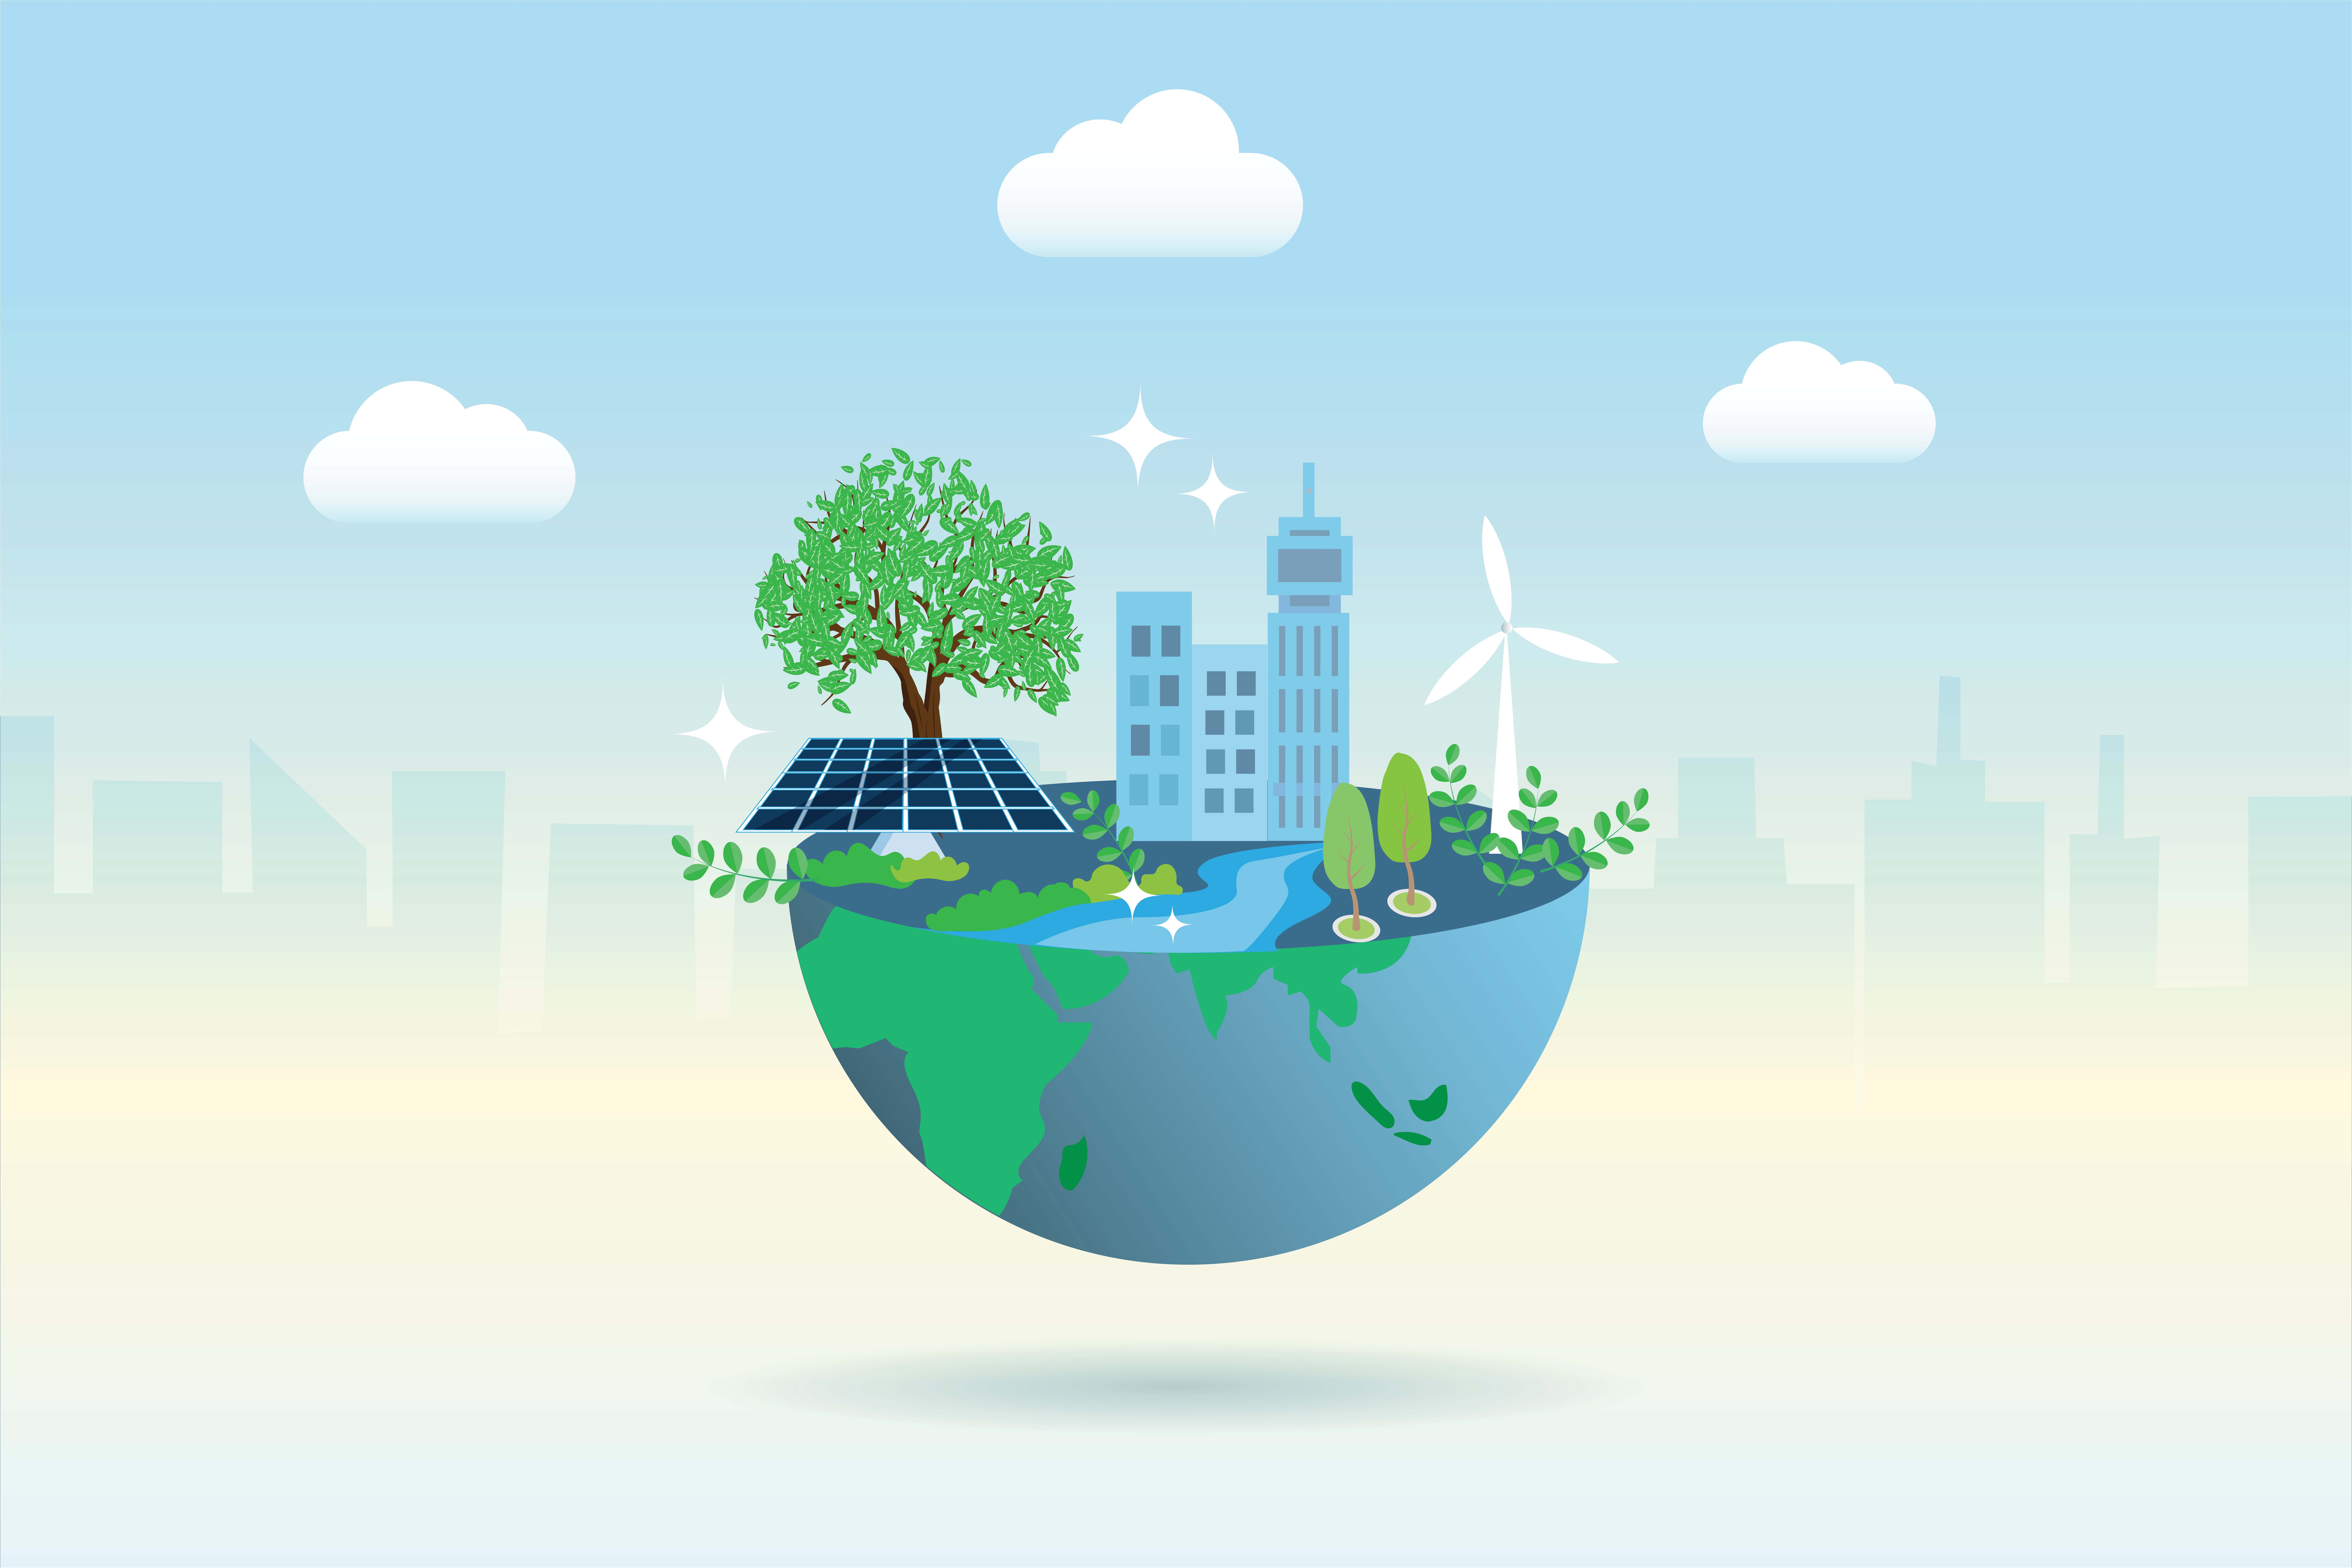 An image of half of the earth. Sitting on top of it is a tree, a building and a windmill. The background contains the outline of a city skyline with clouds above the buildings 